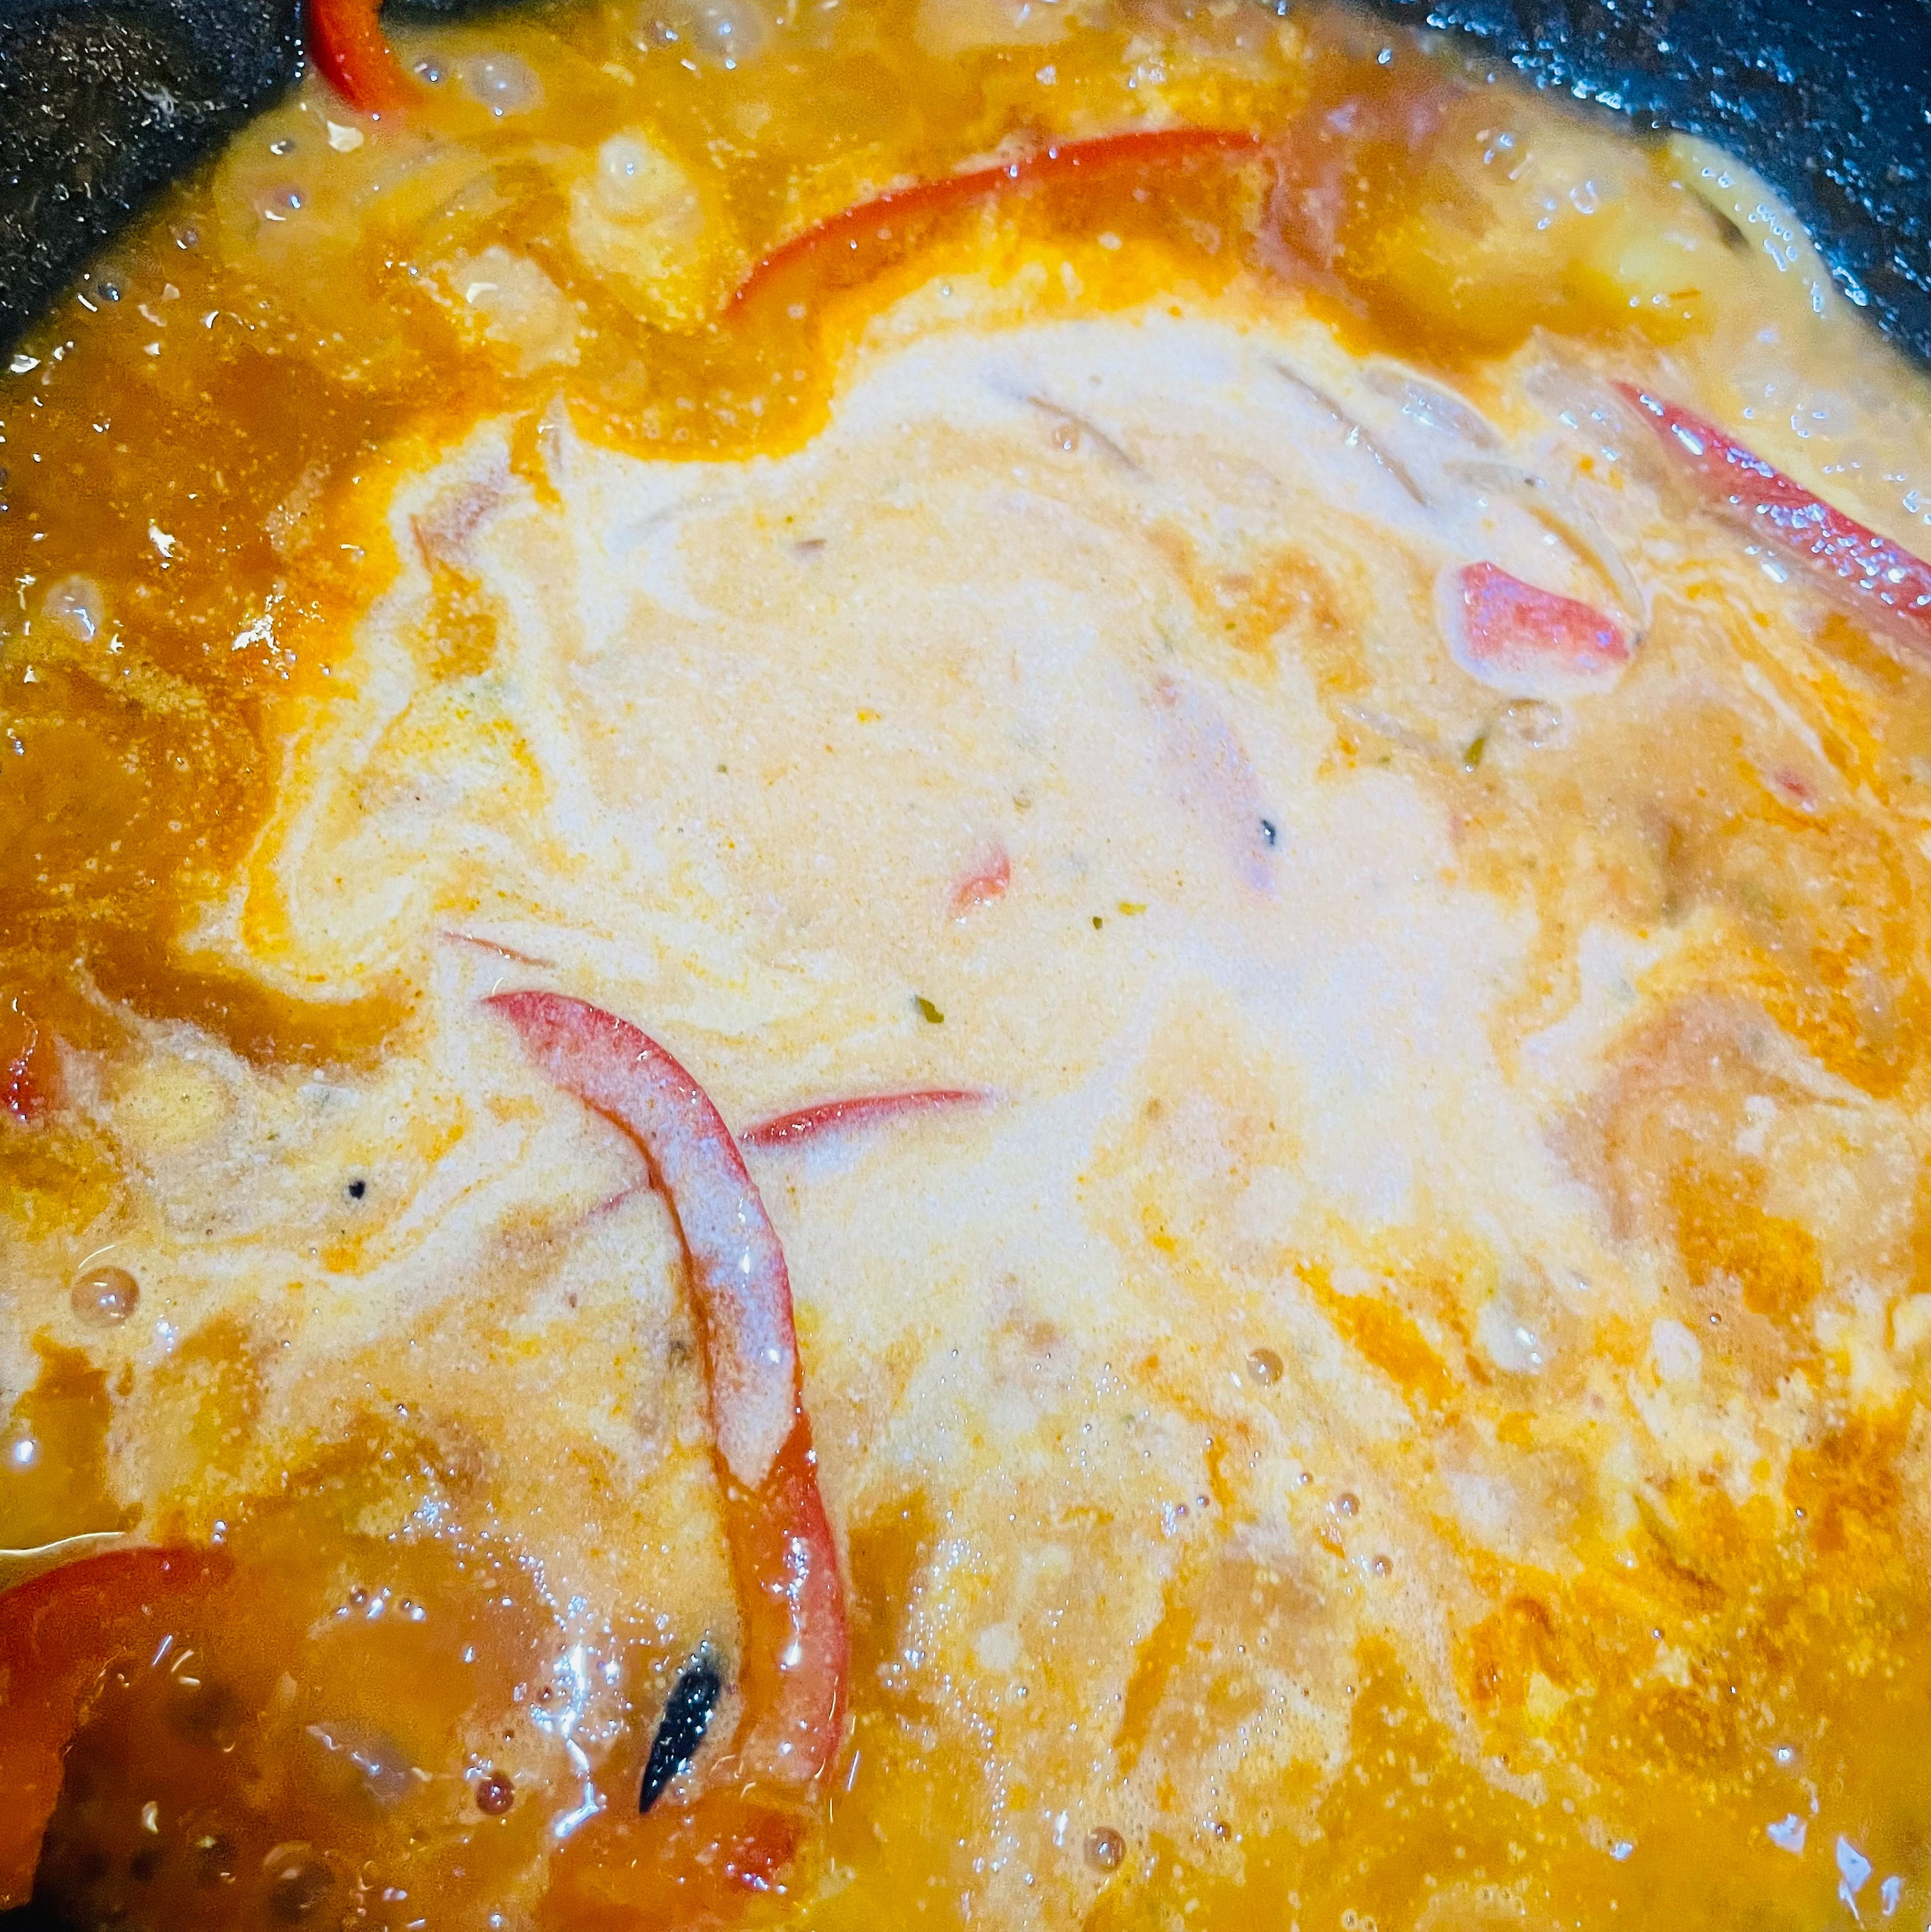 And then add white wine, spaghetti sauce, tomato paste, cream. Mix it until combine.. add salt, black pepper, smoked paprika powder, mixed herbs to taste. Let it simmer for about 10 minutes or until the chicken breast cooked perfectly-not pink